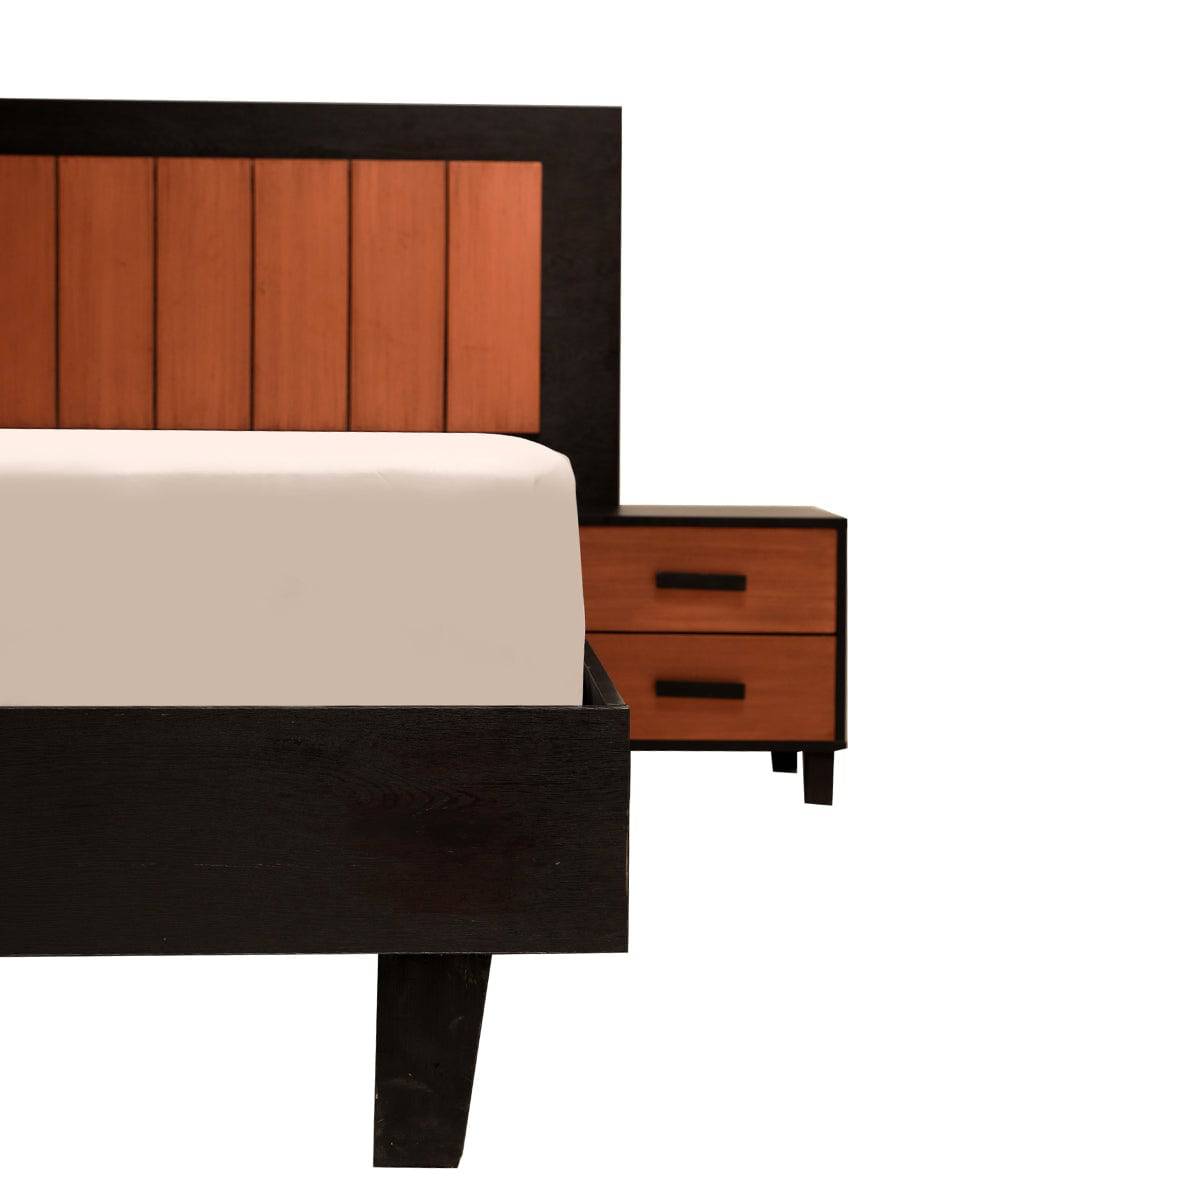 Harbor Bed with side tables